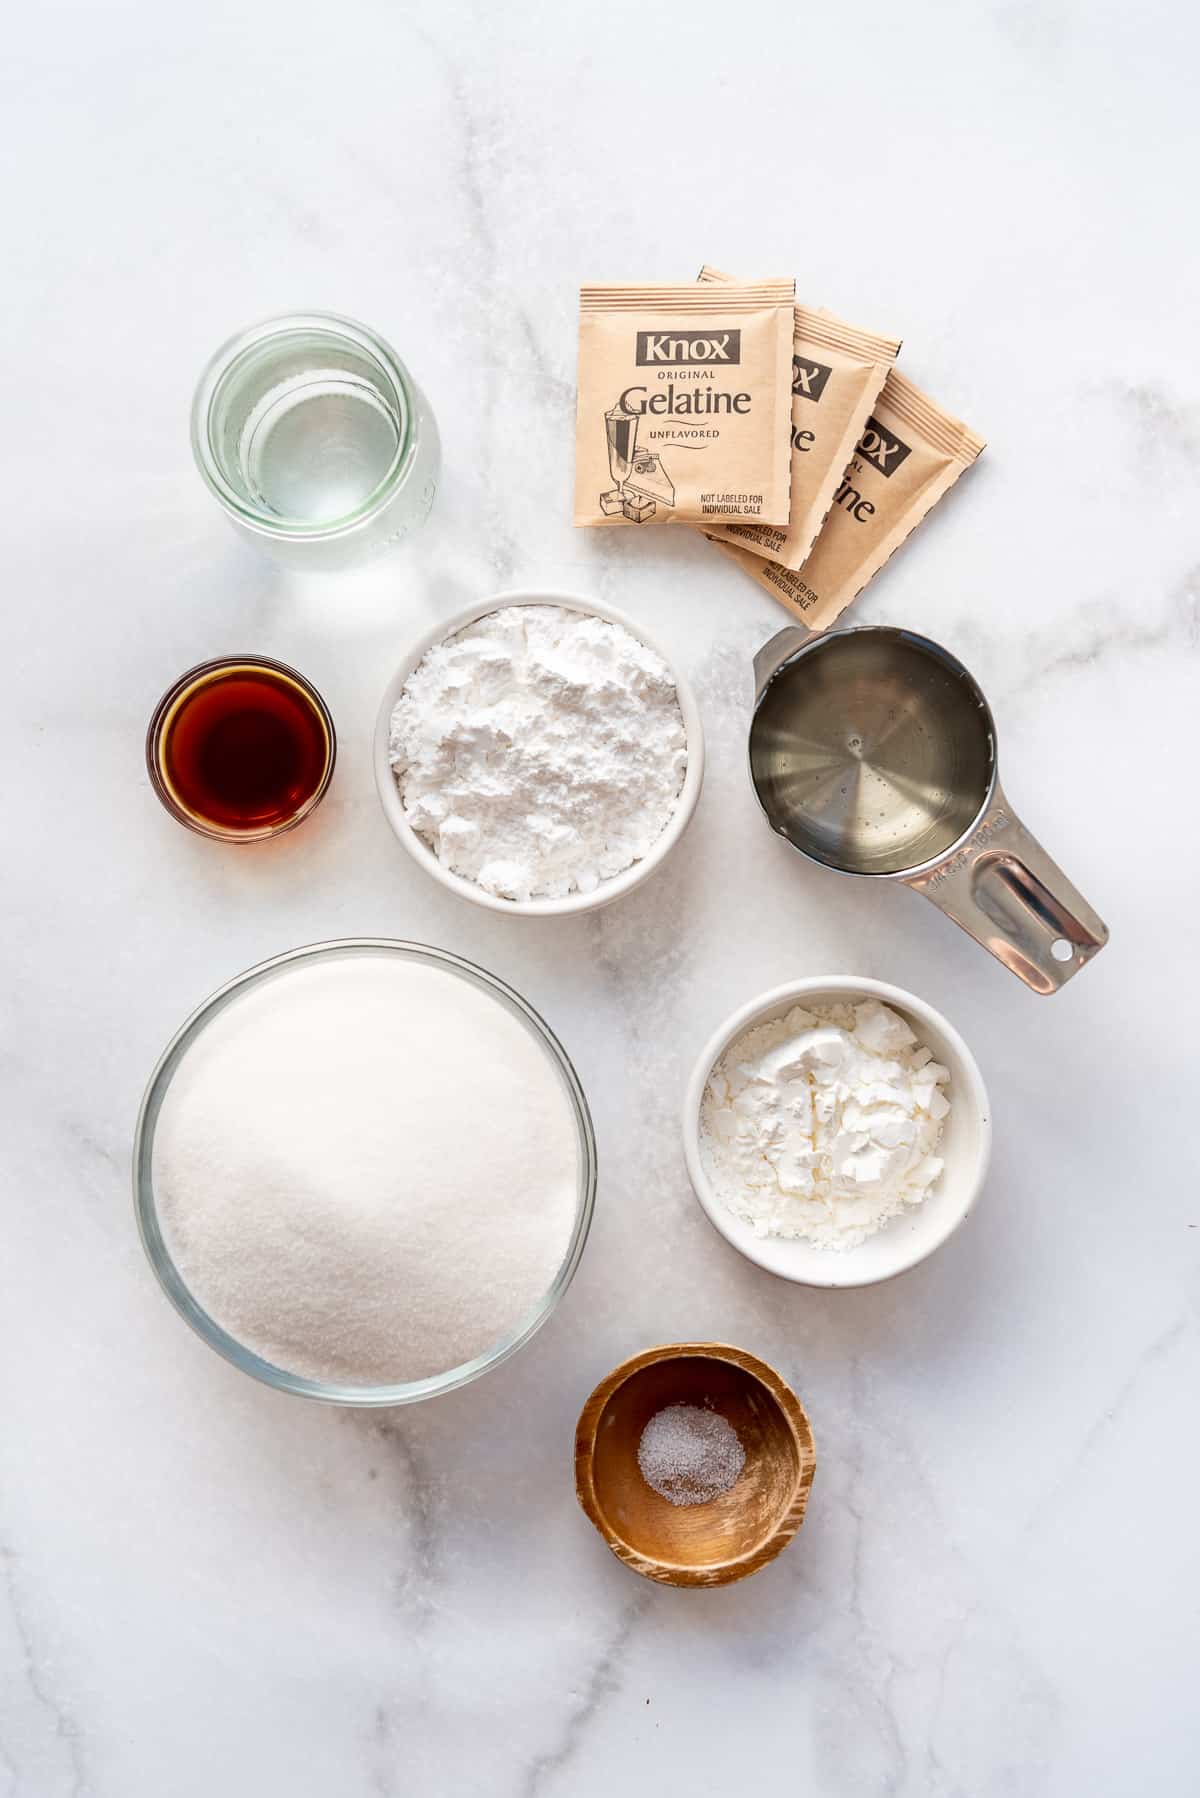 Ingredients for homemade marshmallows.